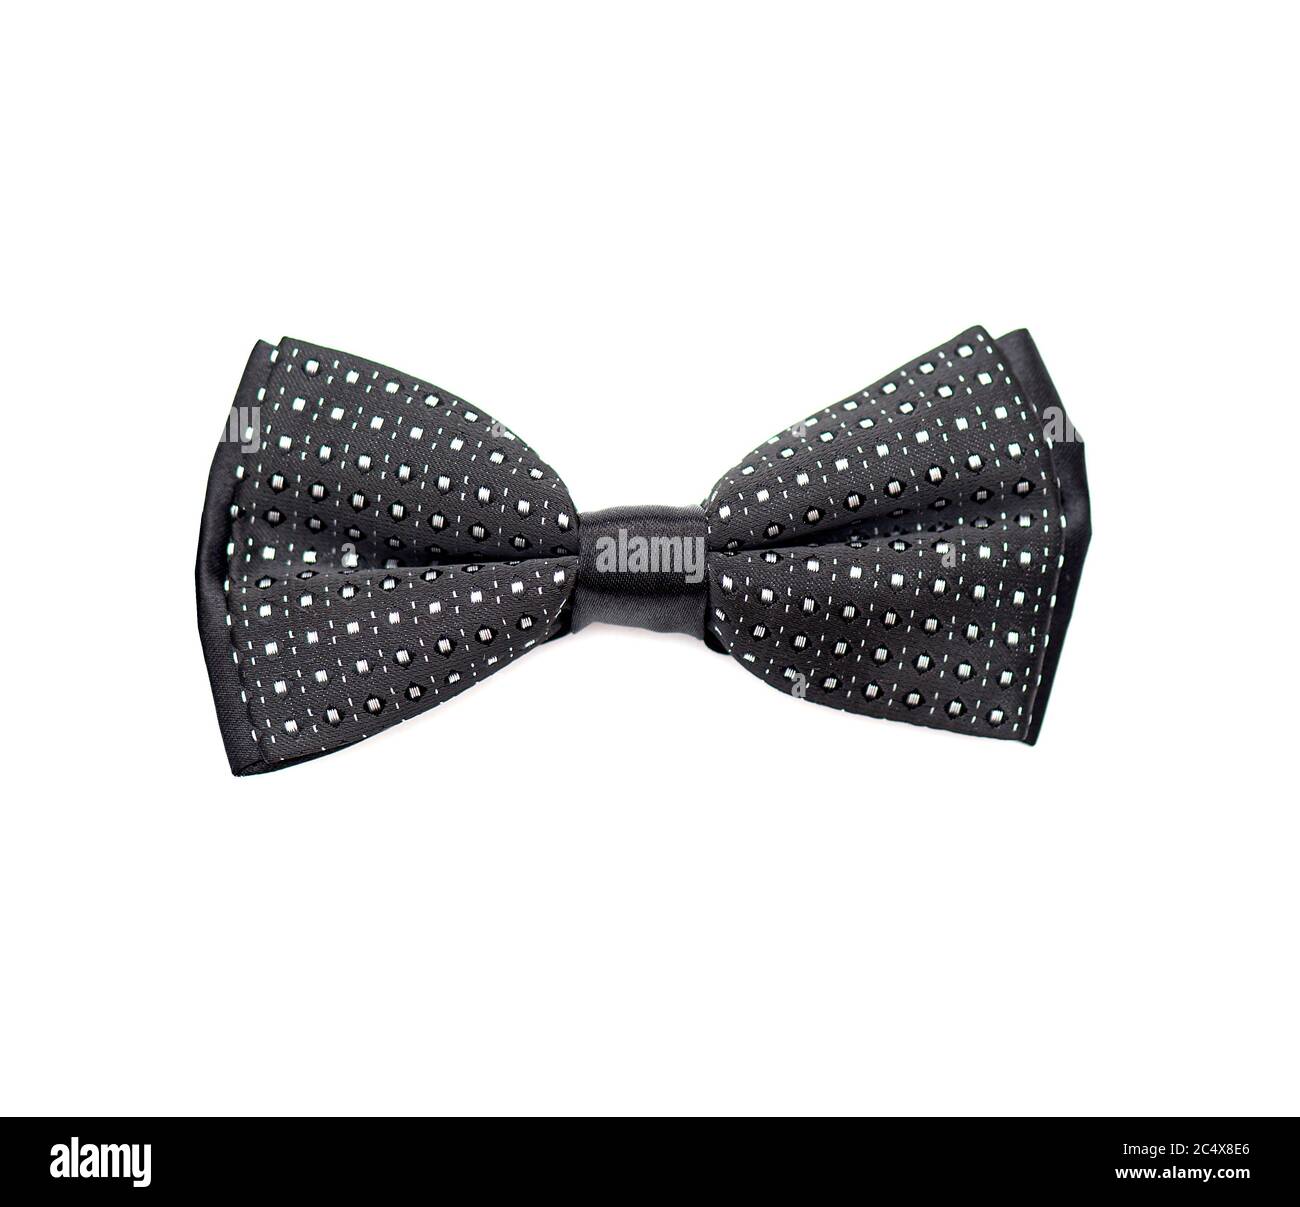 Black bow-tie with pattern isolated on a white background Stock Photo